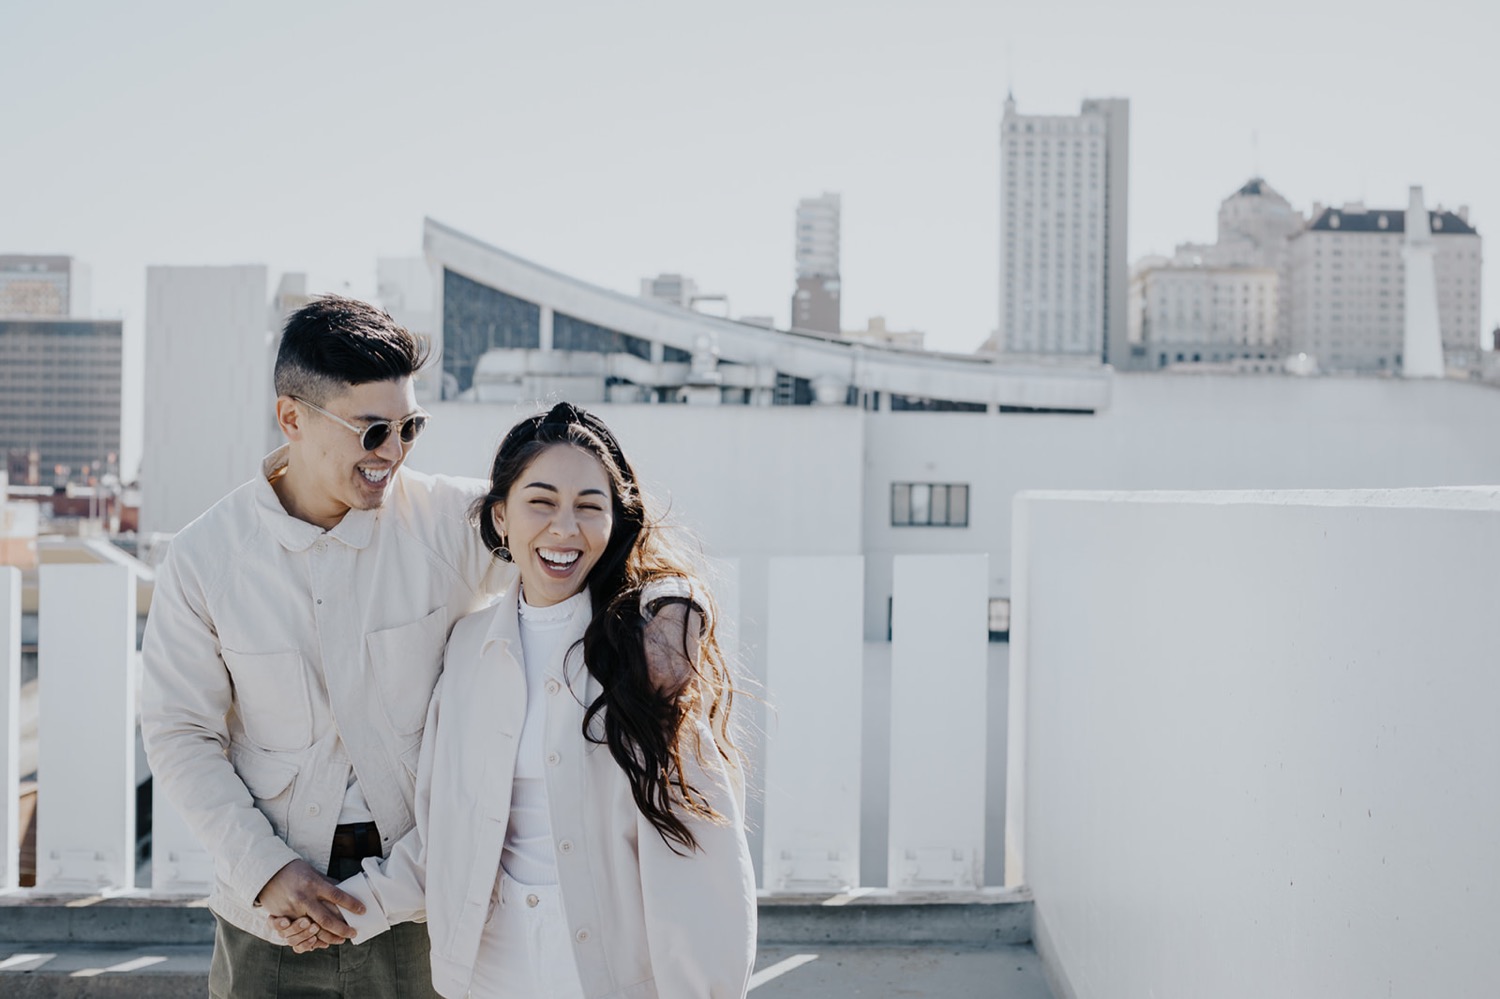 What Do Couples Do in L.A.? - Inspire